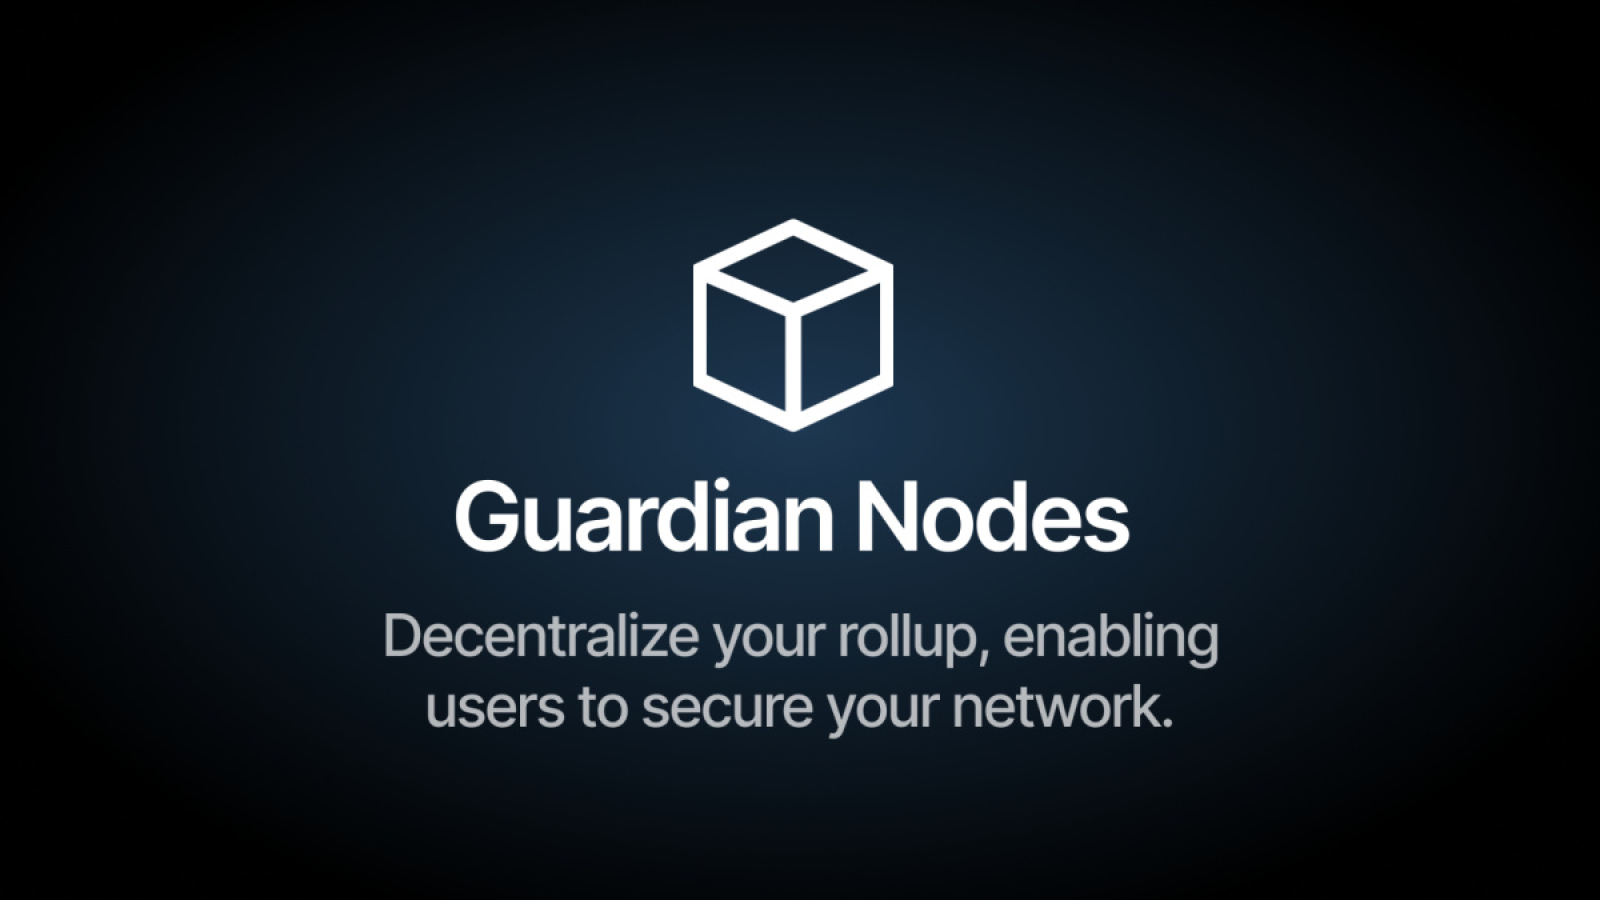 Caldera Launches Guardian Nodes, Creating a New Path for Teams to Raise Funds and Decentralize Their Network